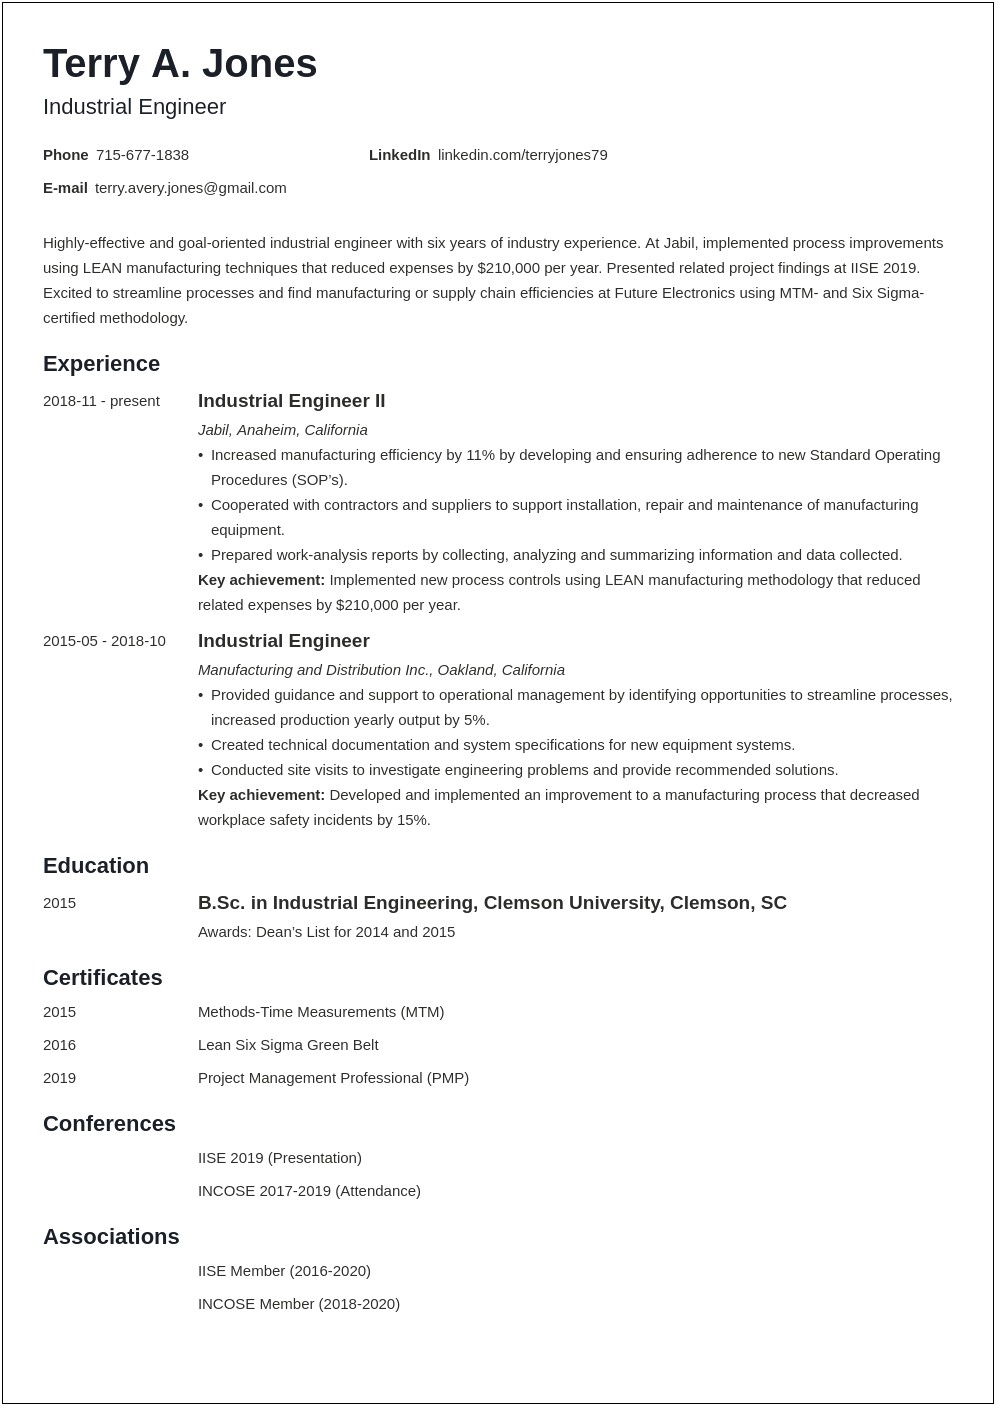 Resume Objective Statement For Engineer